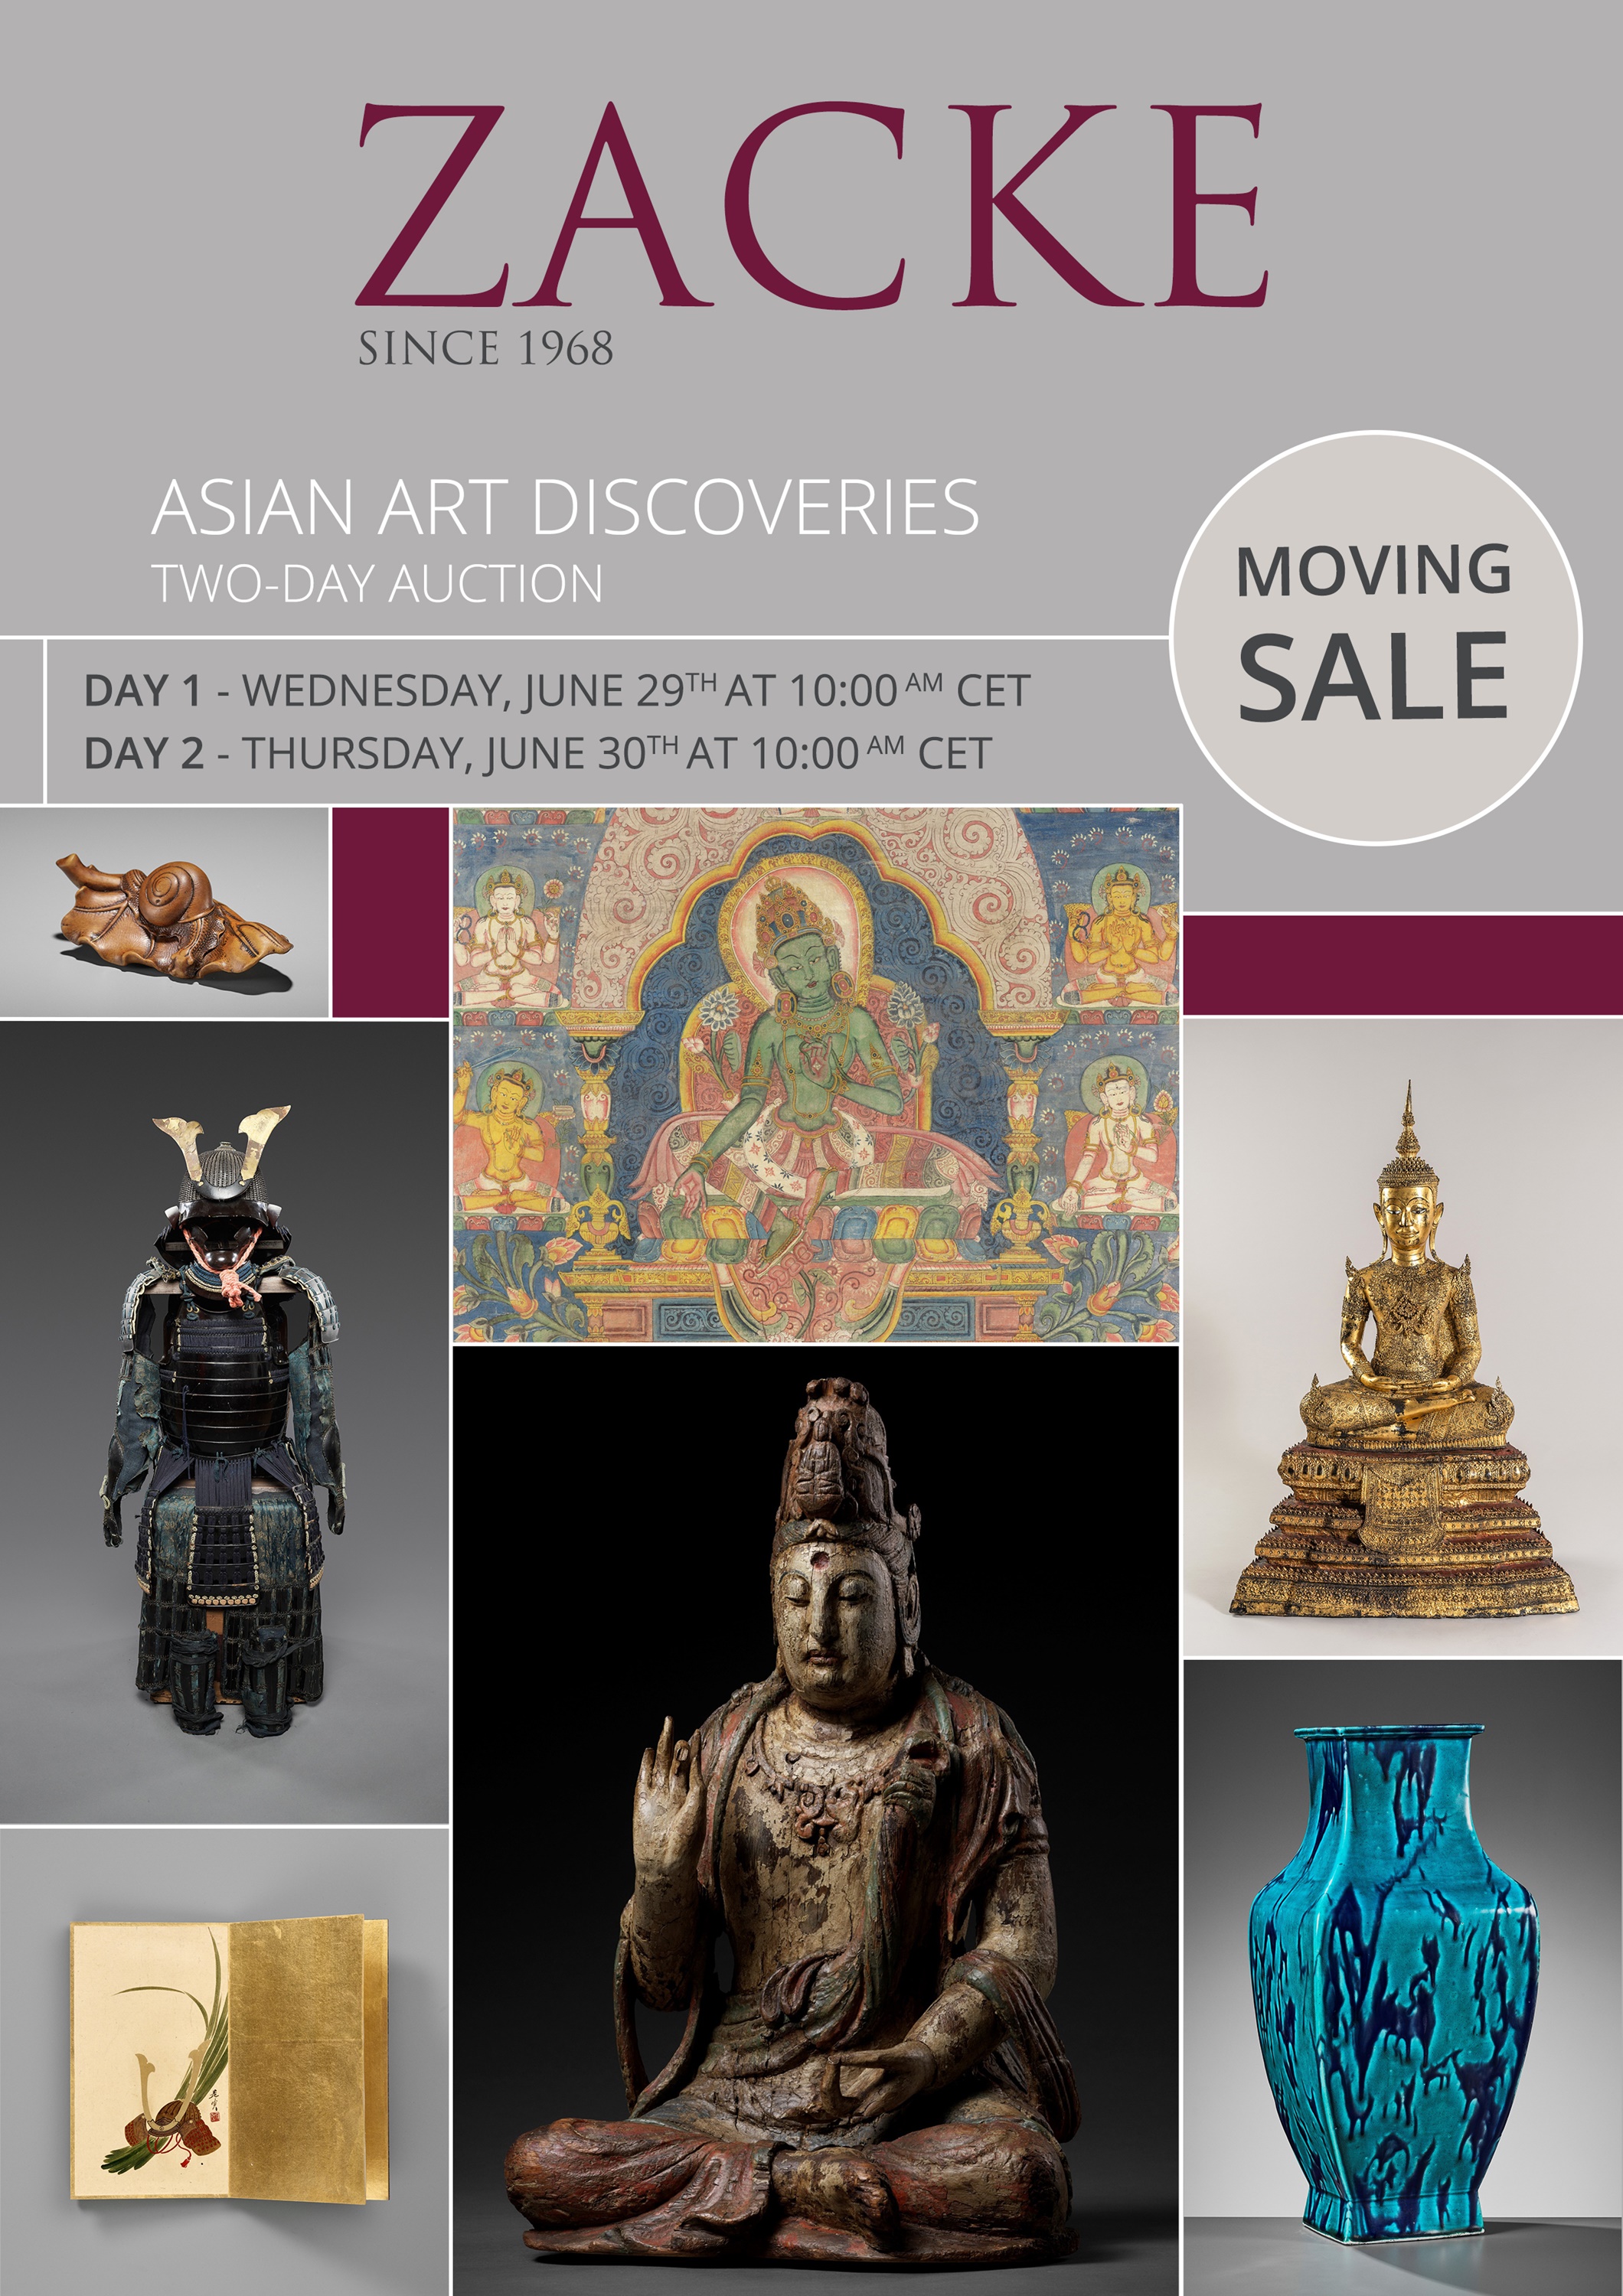 TWO-DAY AUCTION - Asian Art Discoveries - Moving Sale!